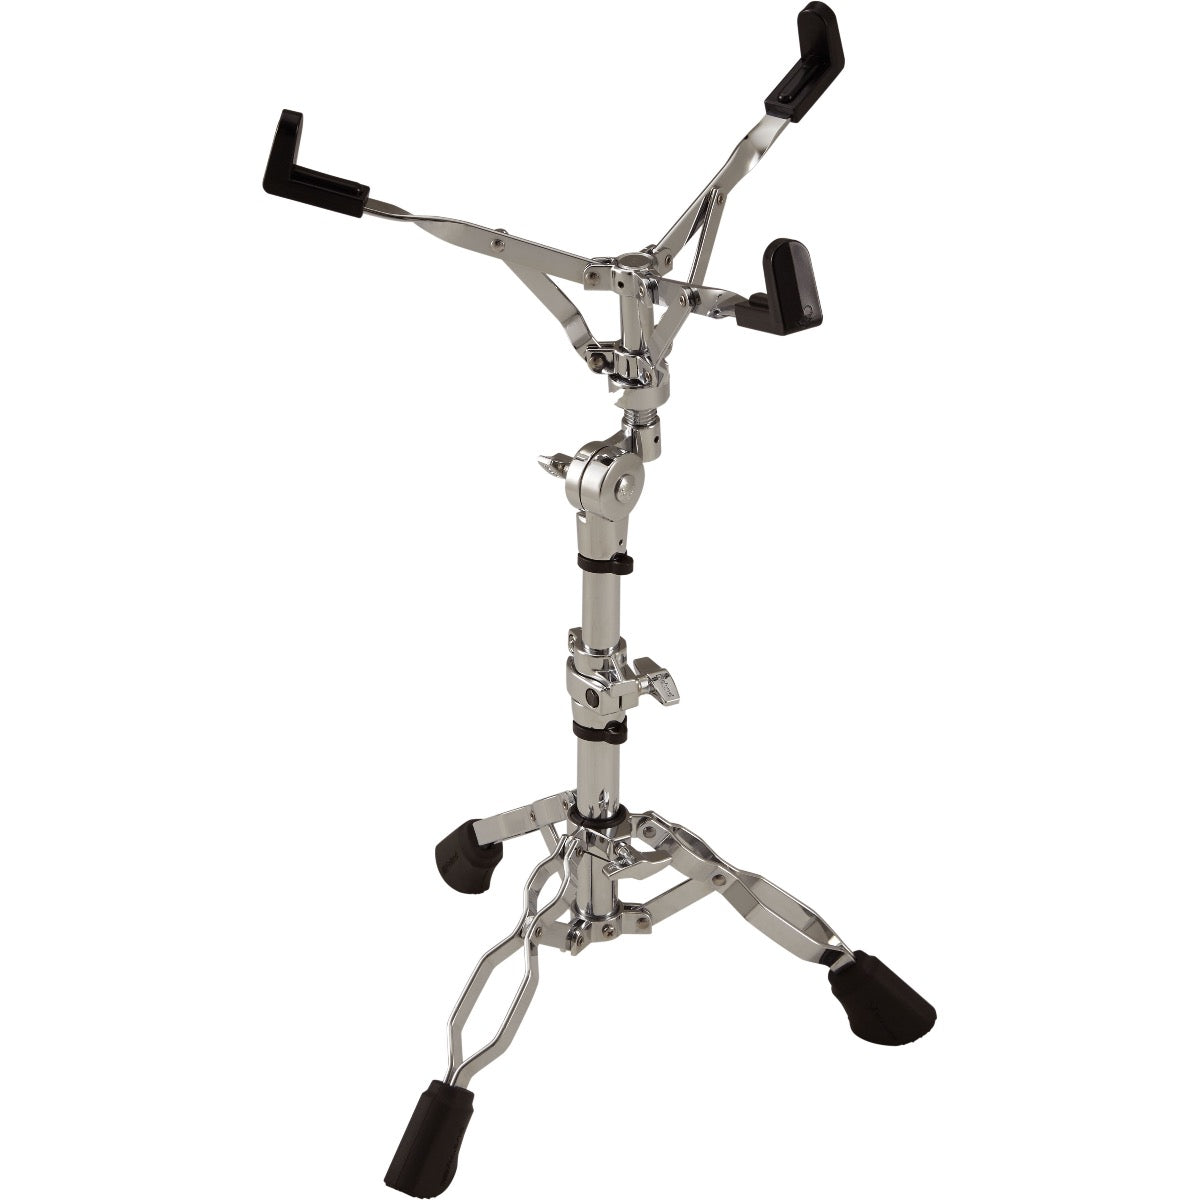 3/4 view of Roland RDH-130 V-Drums Snare Drum Stand with Noise Eater Technology showing top, front and right side